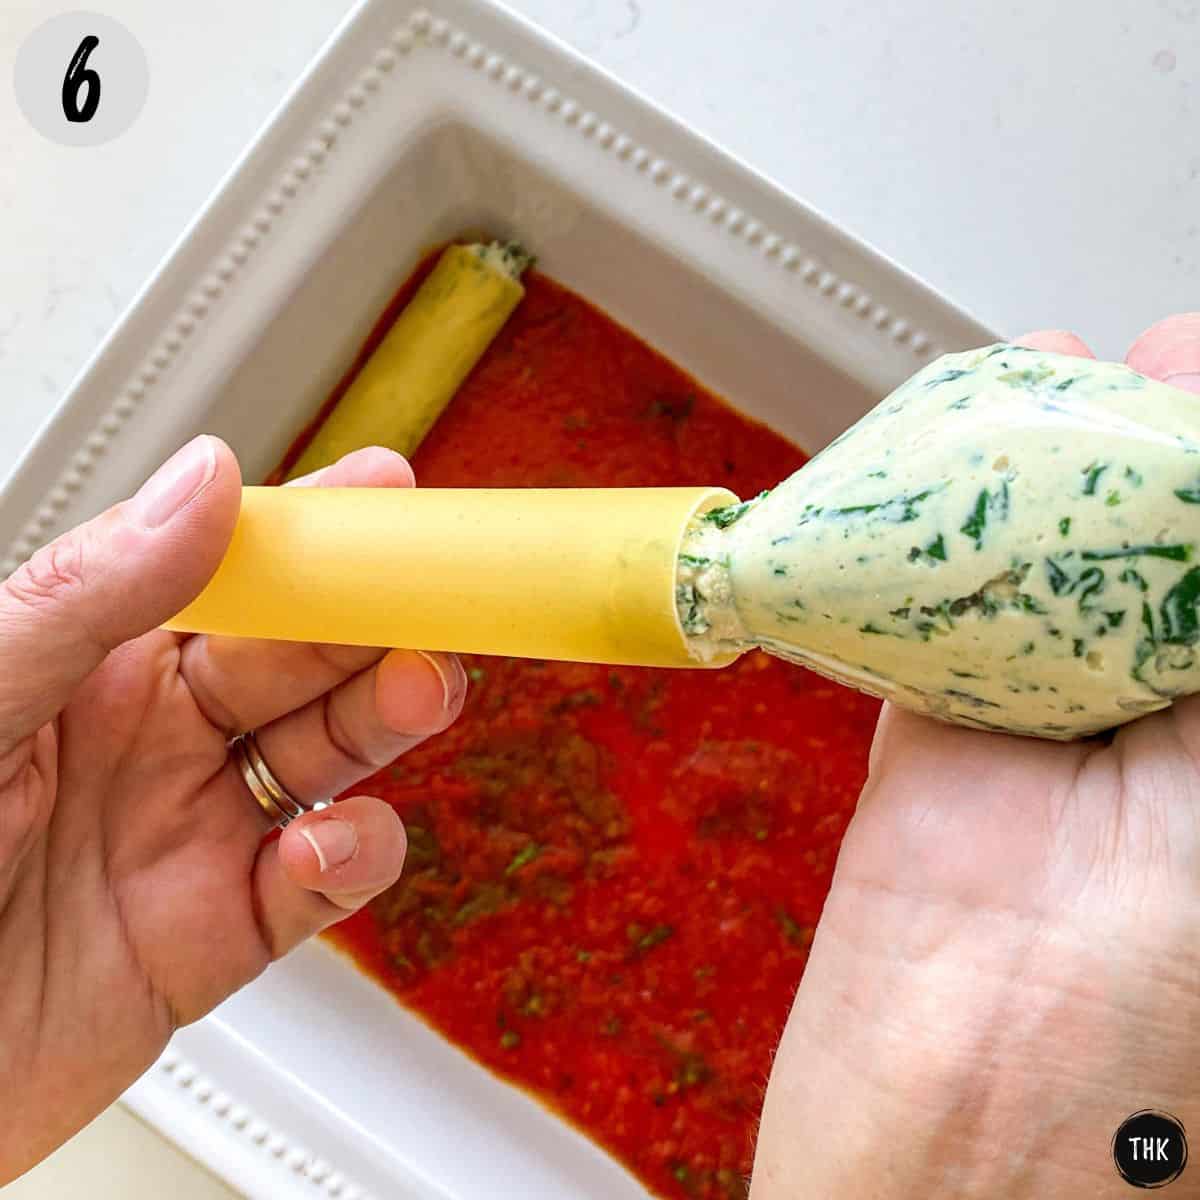 Hand stuffing cannelloni shell with cheese filling from piping bag.